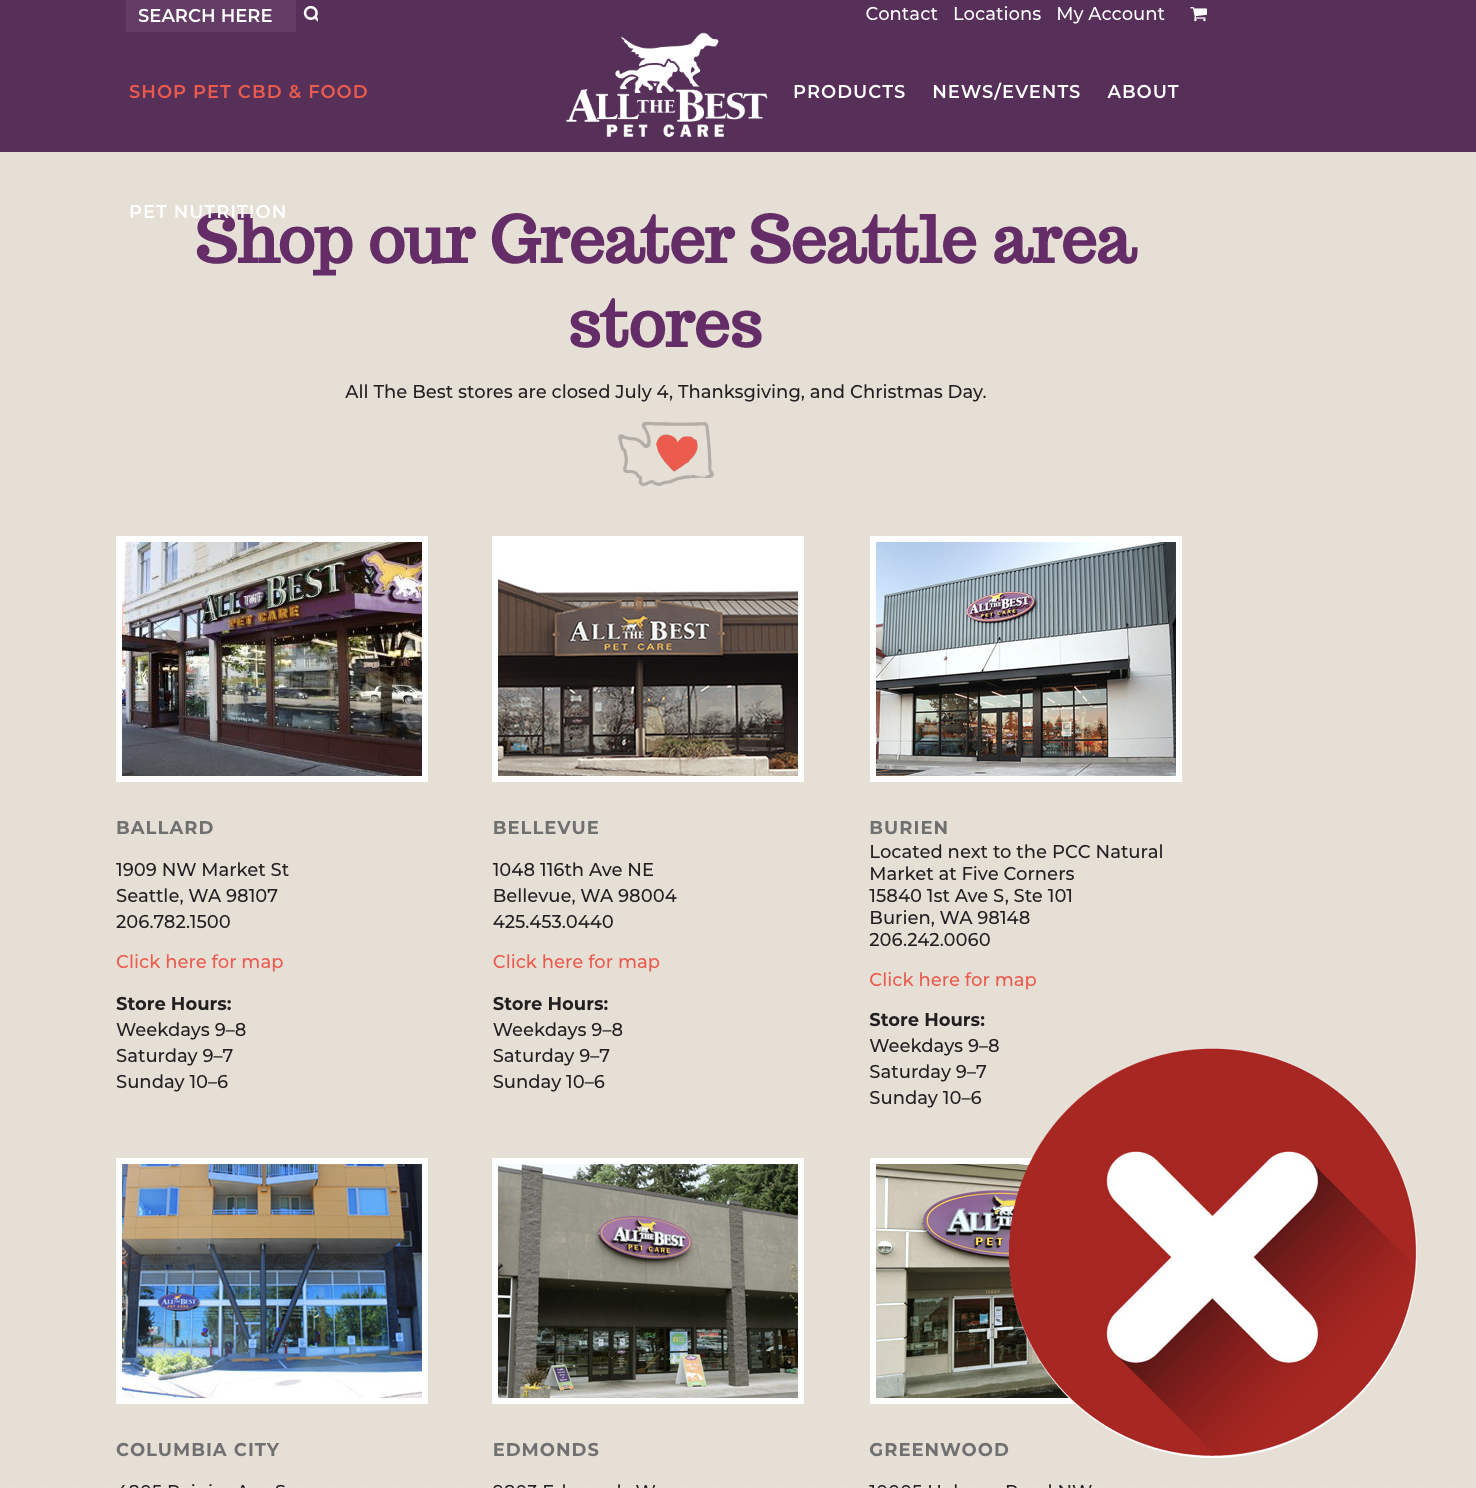 All the Best Pet Care Location Page